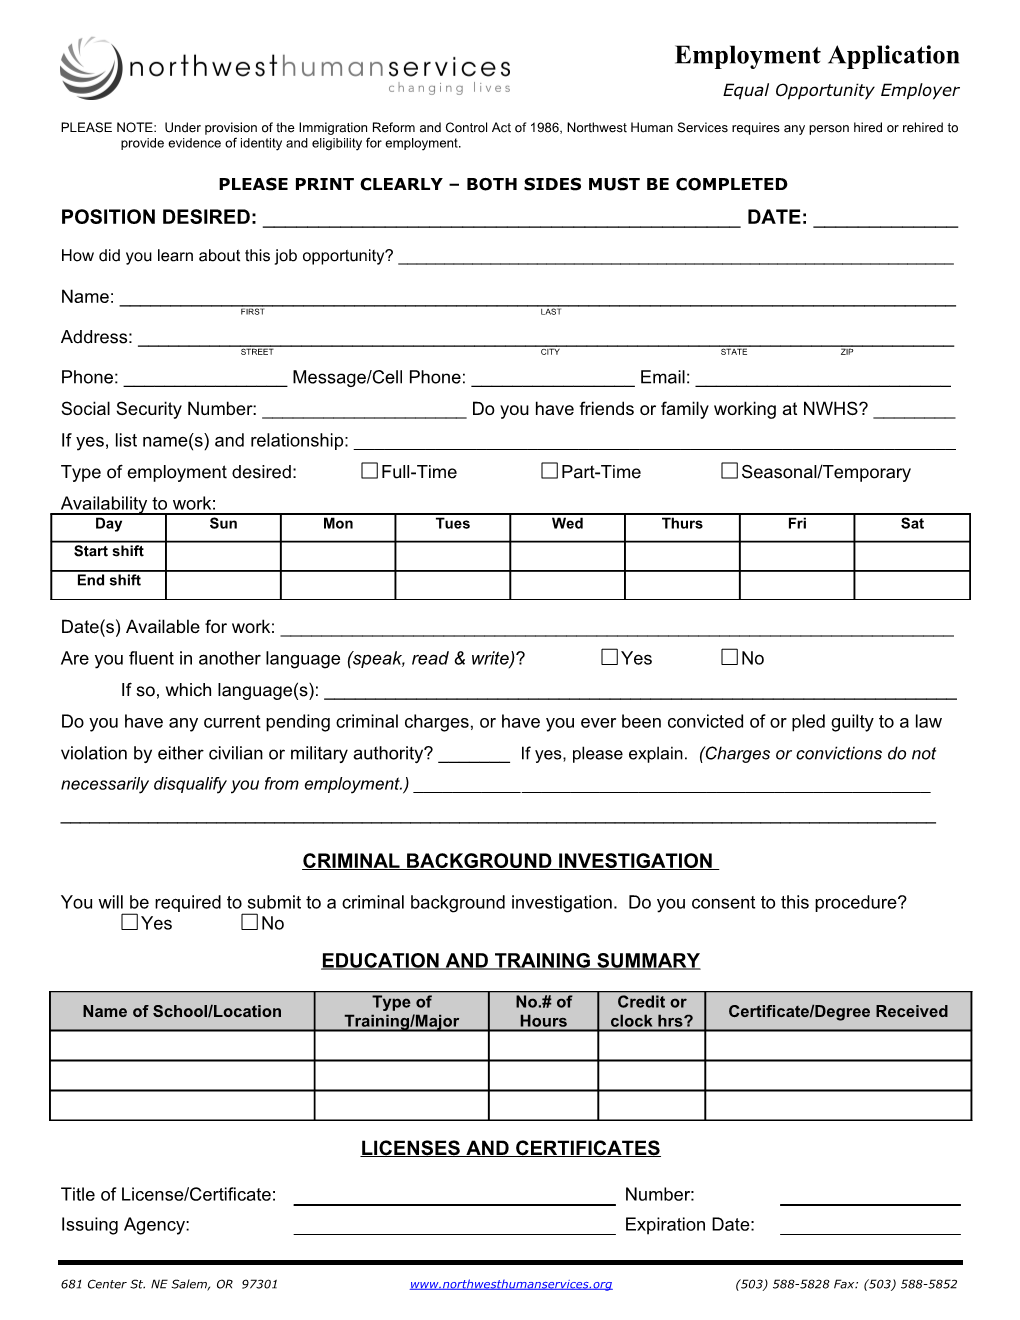 Application for Employment s2